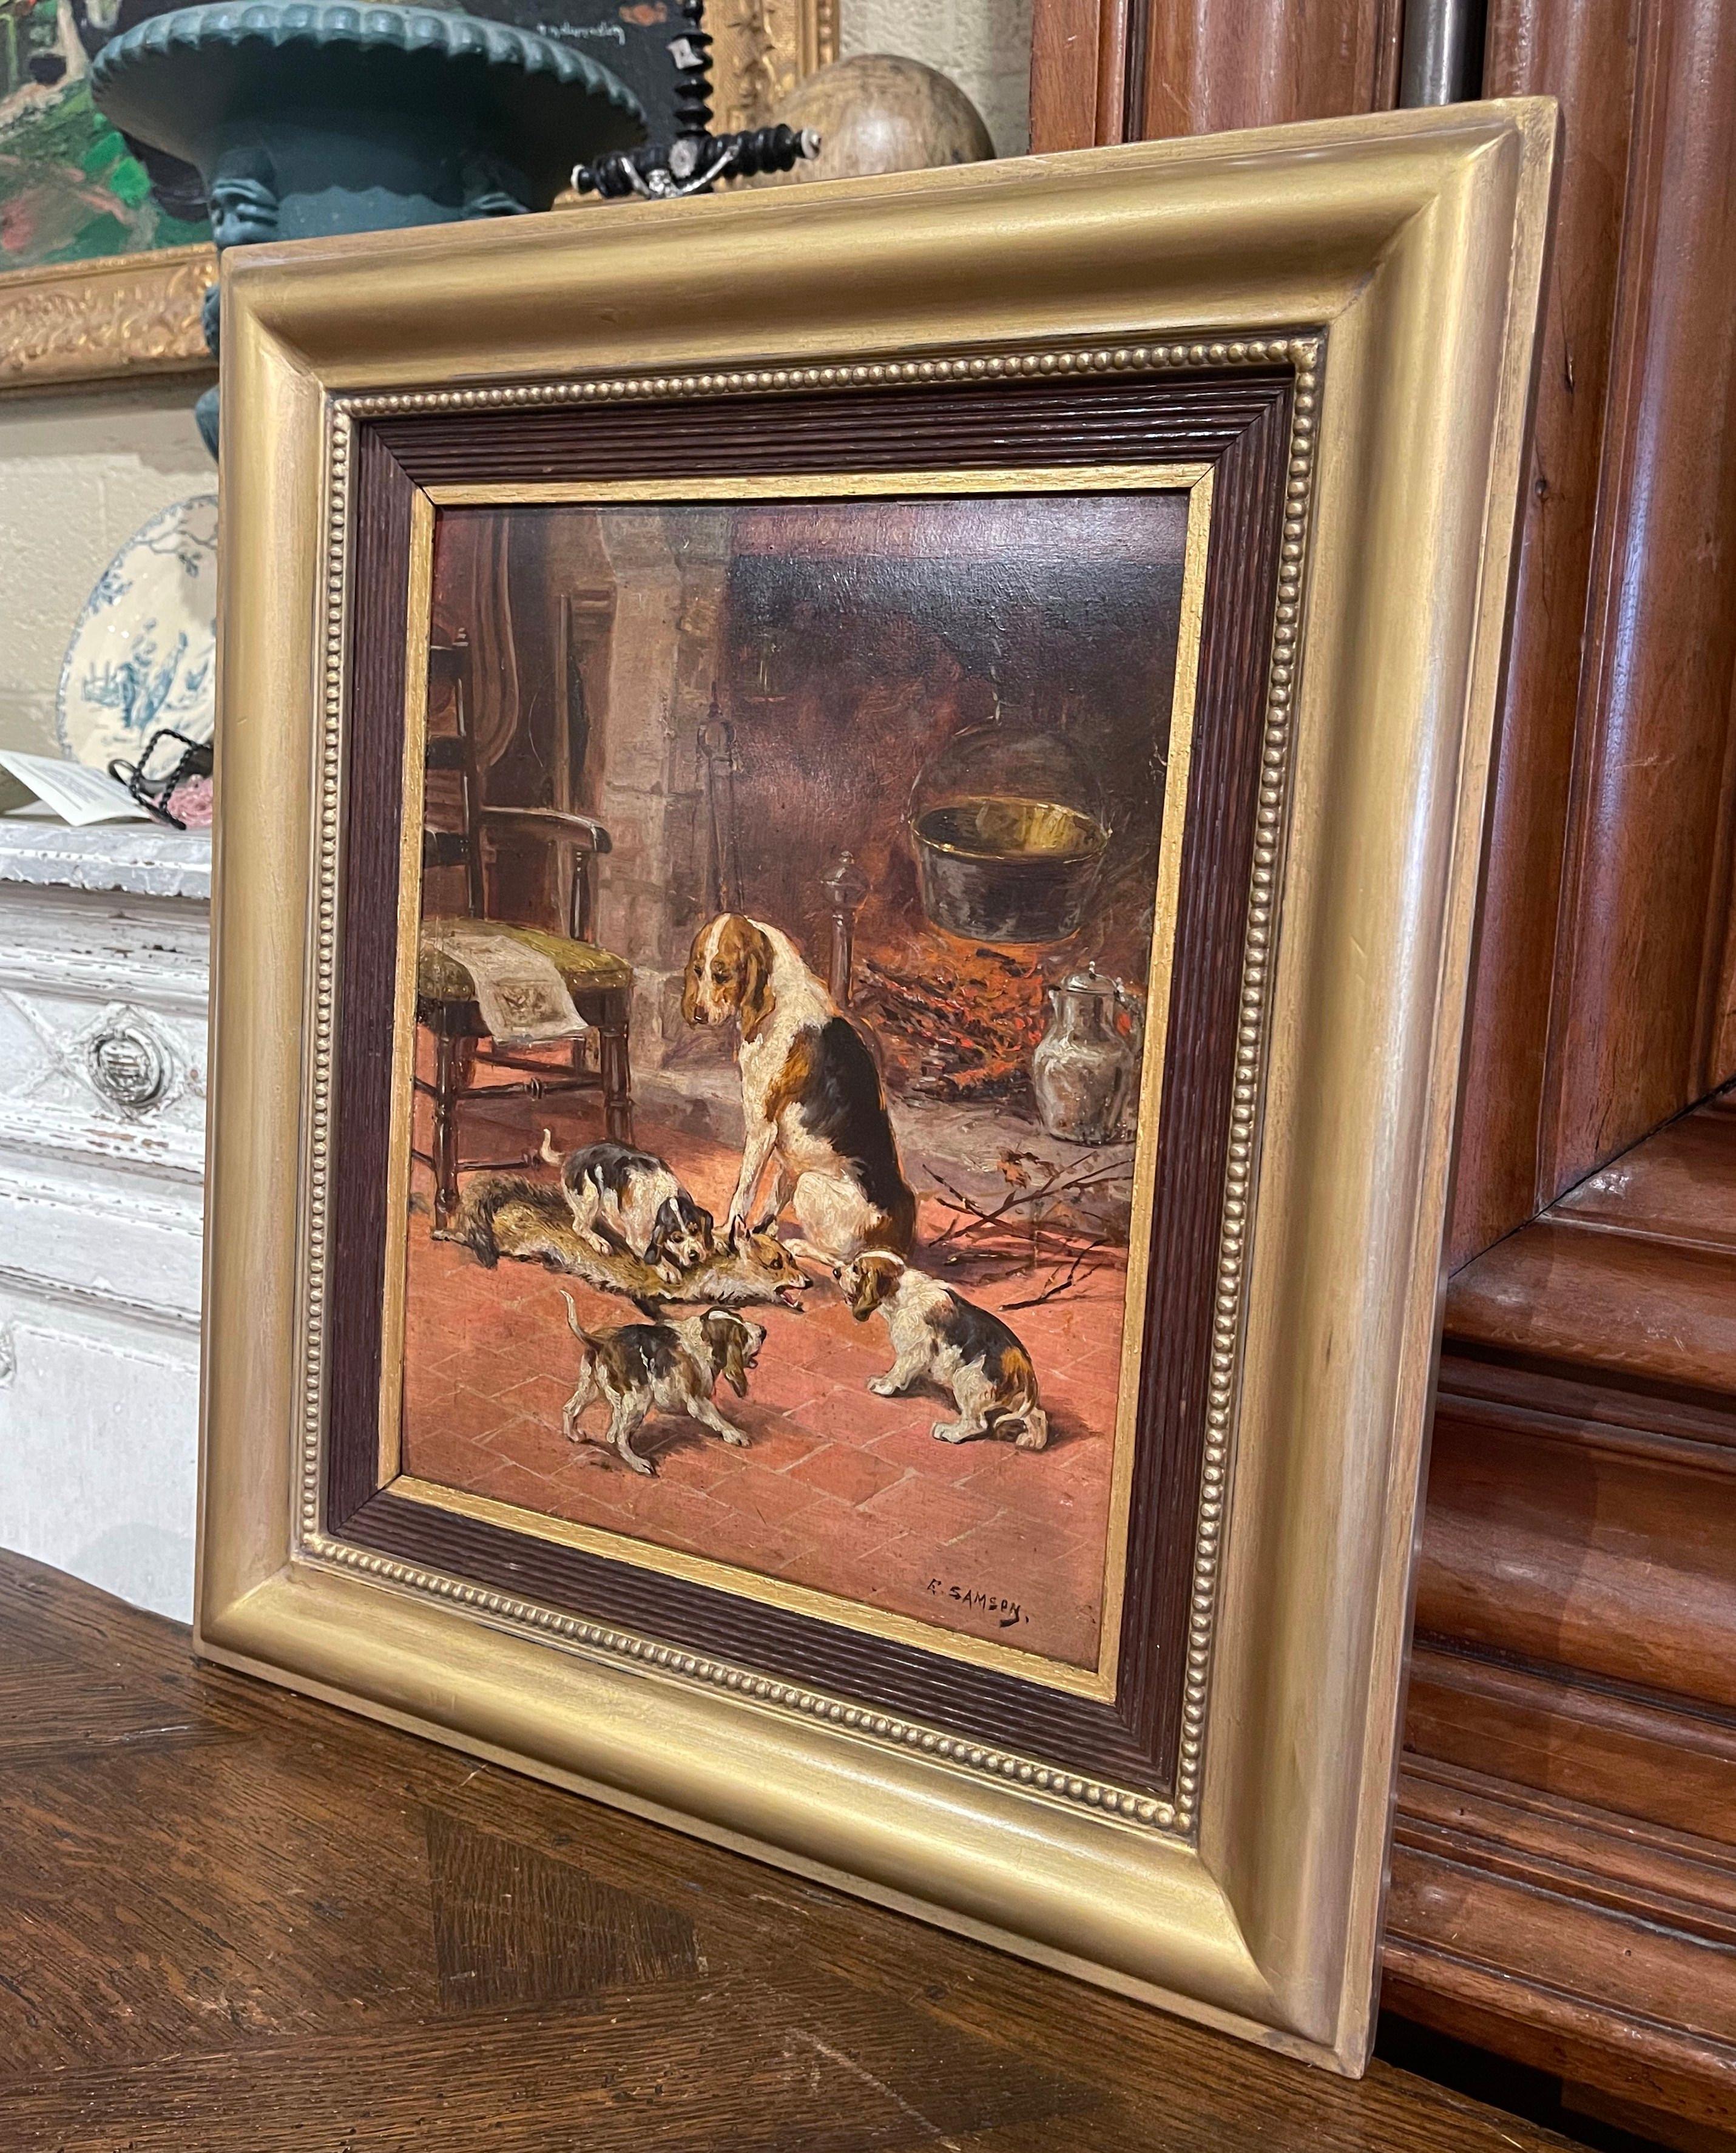 The canvas was hand painted in France circa 1880. Set in the original carved oak and gilt wood frame, the composition features an interior scene with a beagle mother attending her puppies. The artwork is signed on the bottom right corner by French